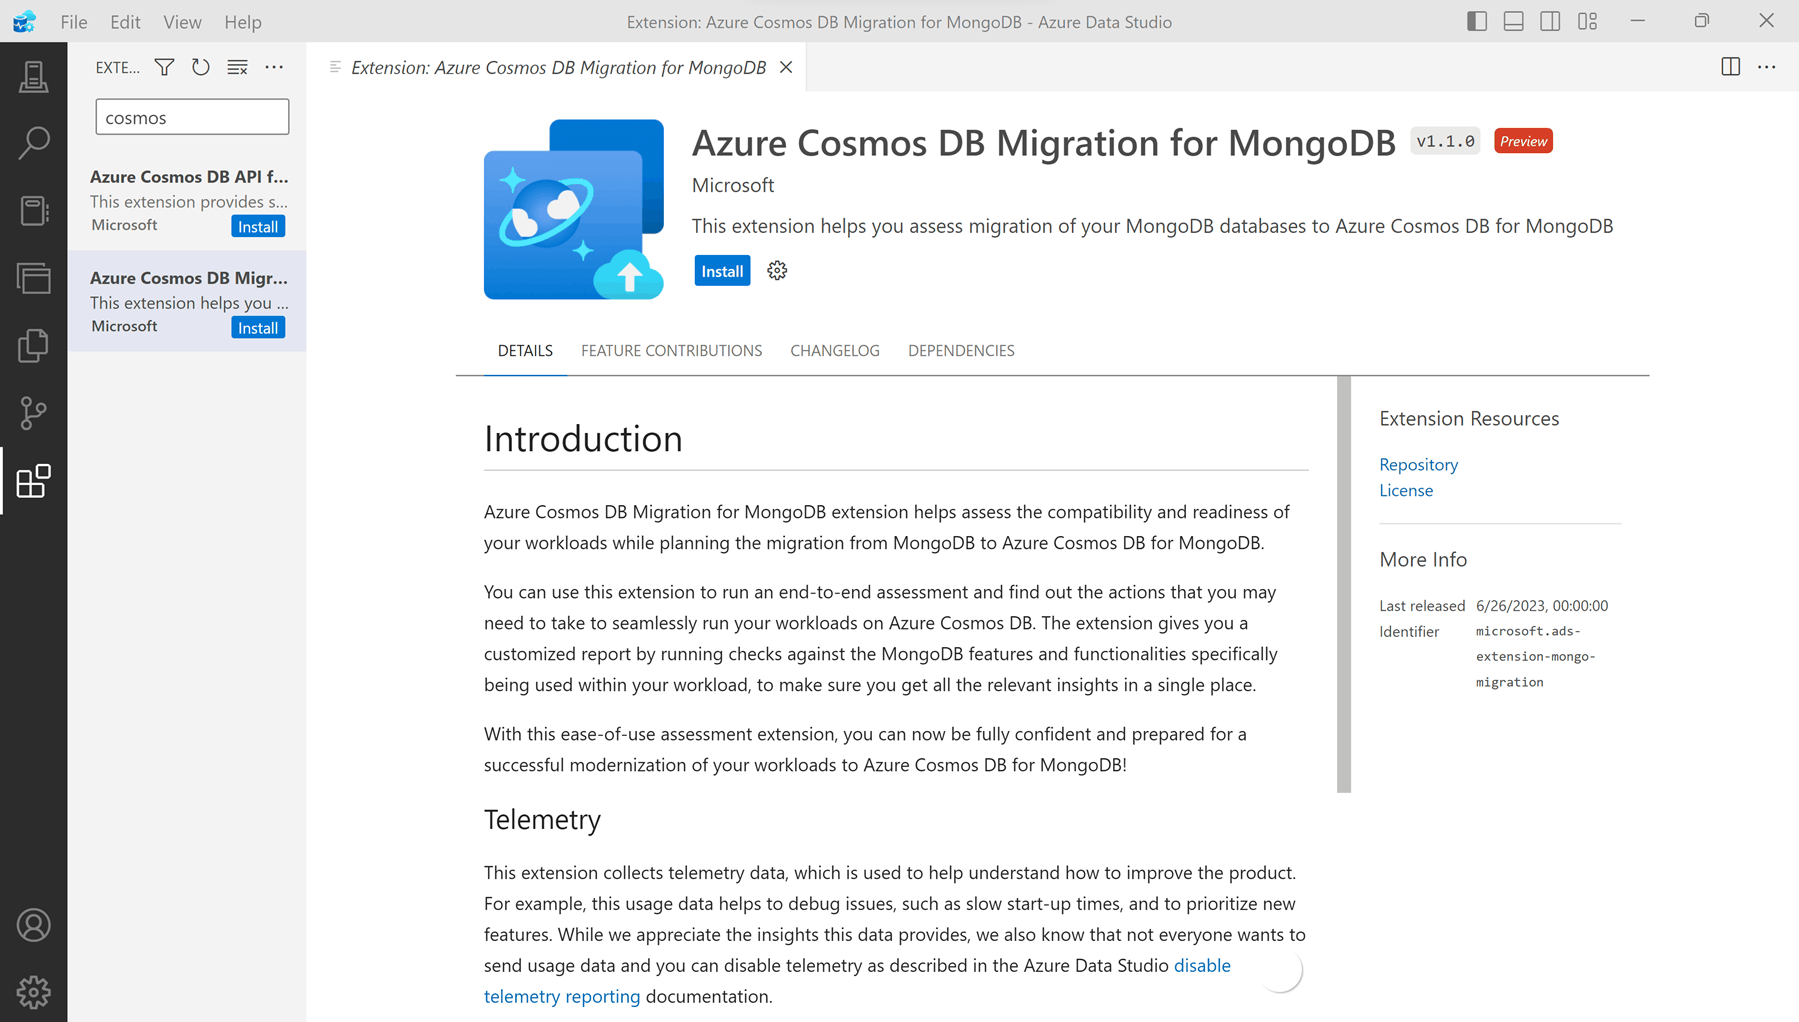 Screenshot of Azure Cosmos DB for MongoDB migration extension install button.